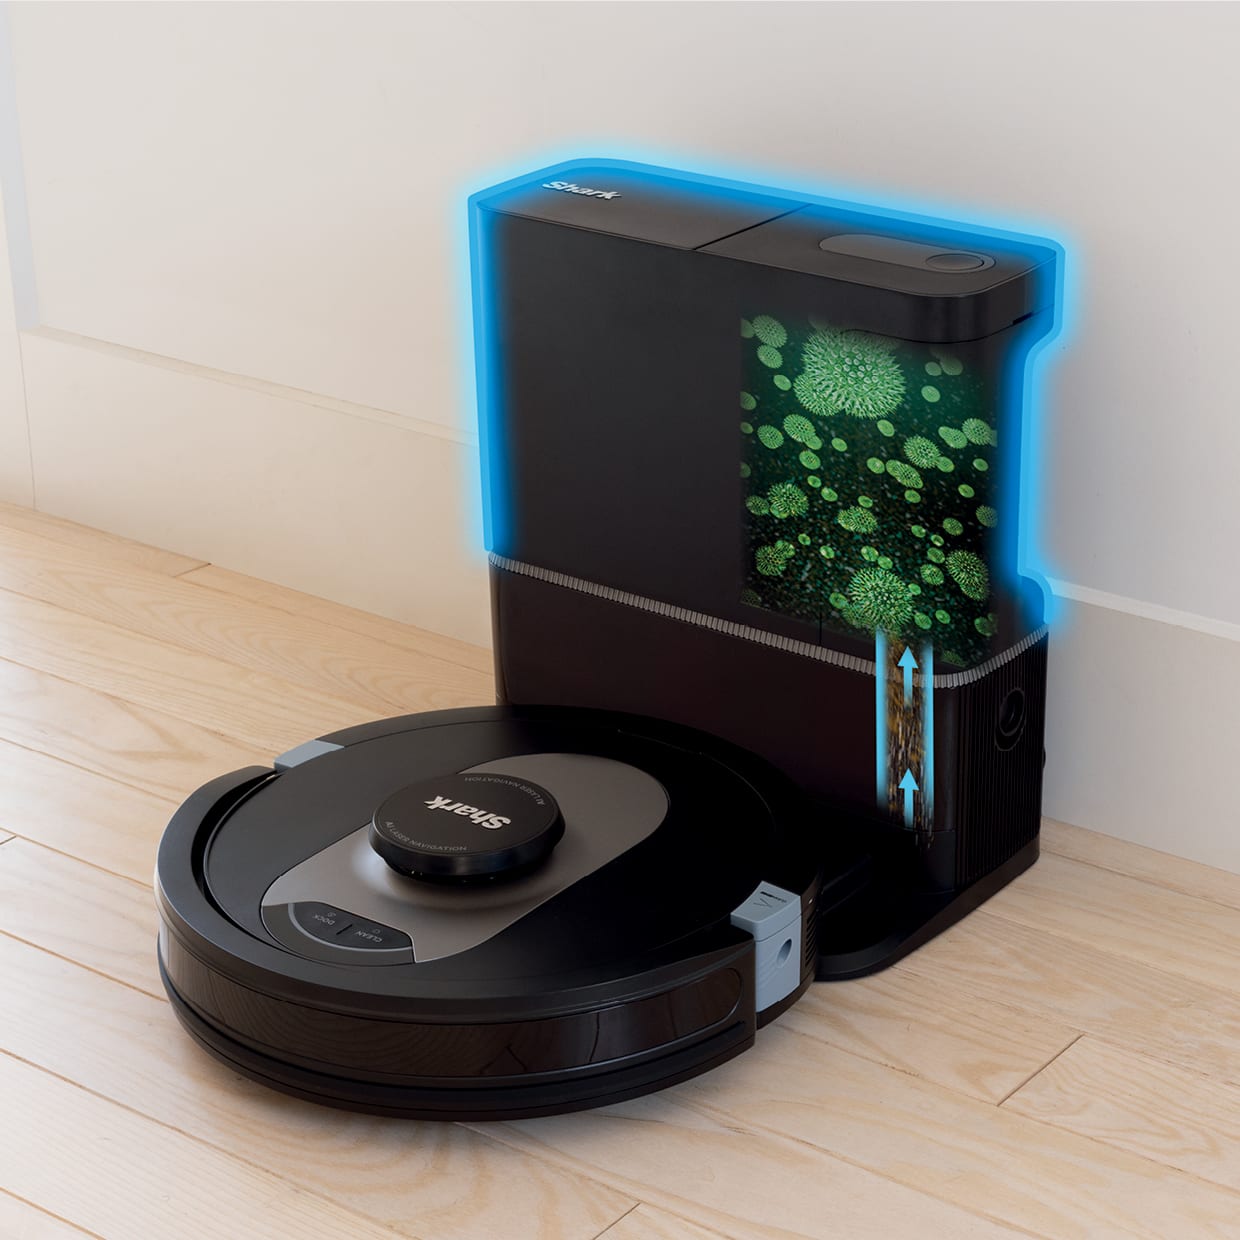 Explorer robots, the automatic vacuum cleaners to capture pet hair &  allergens